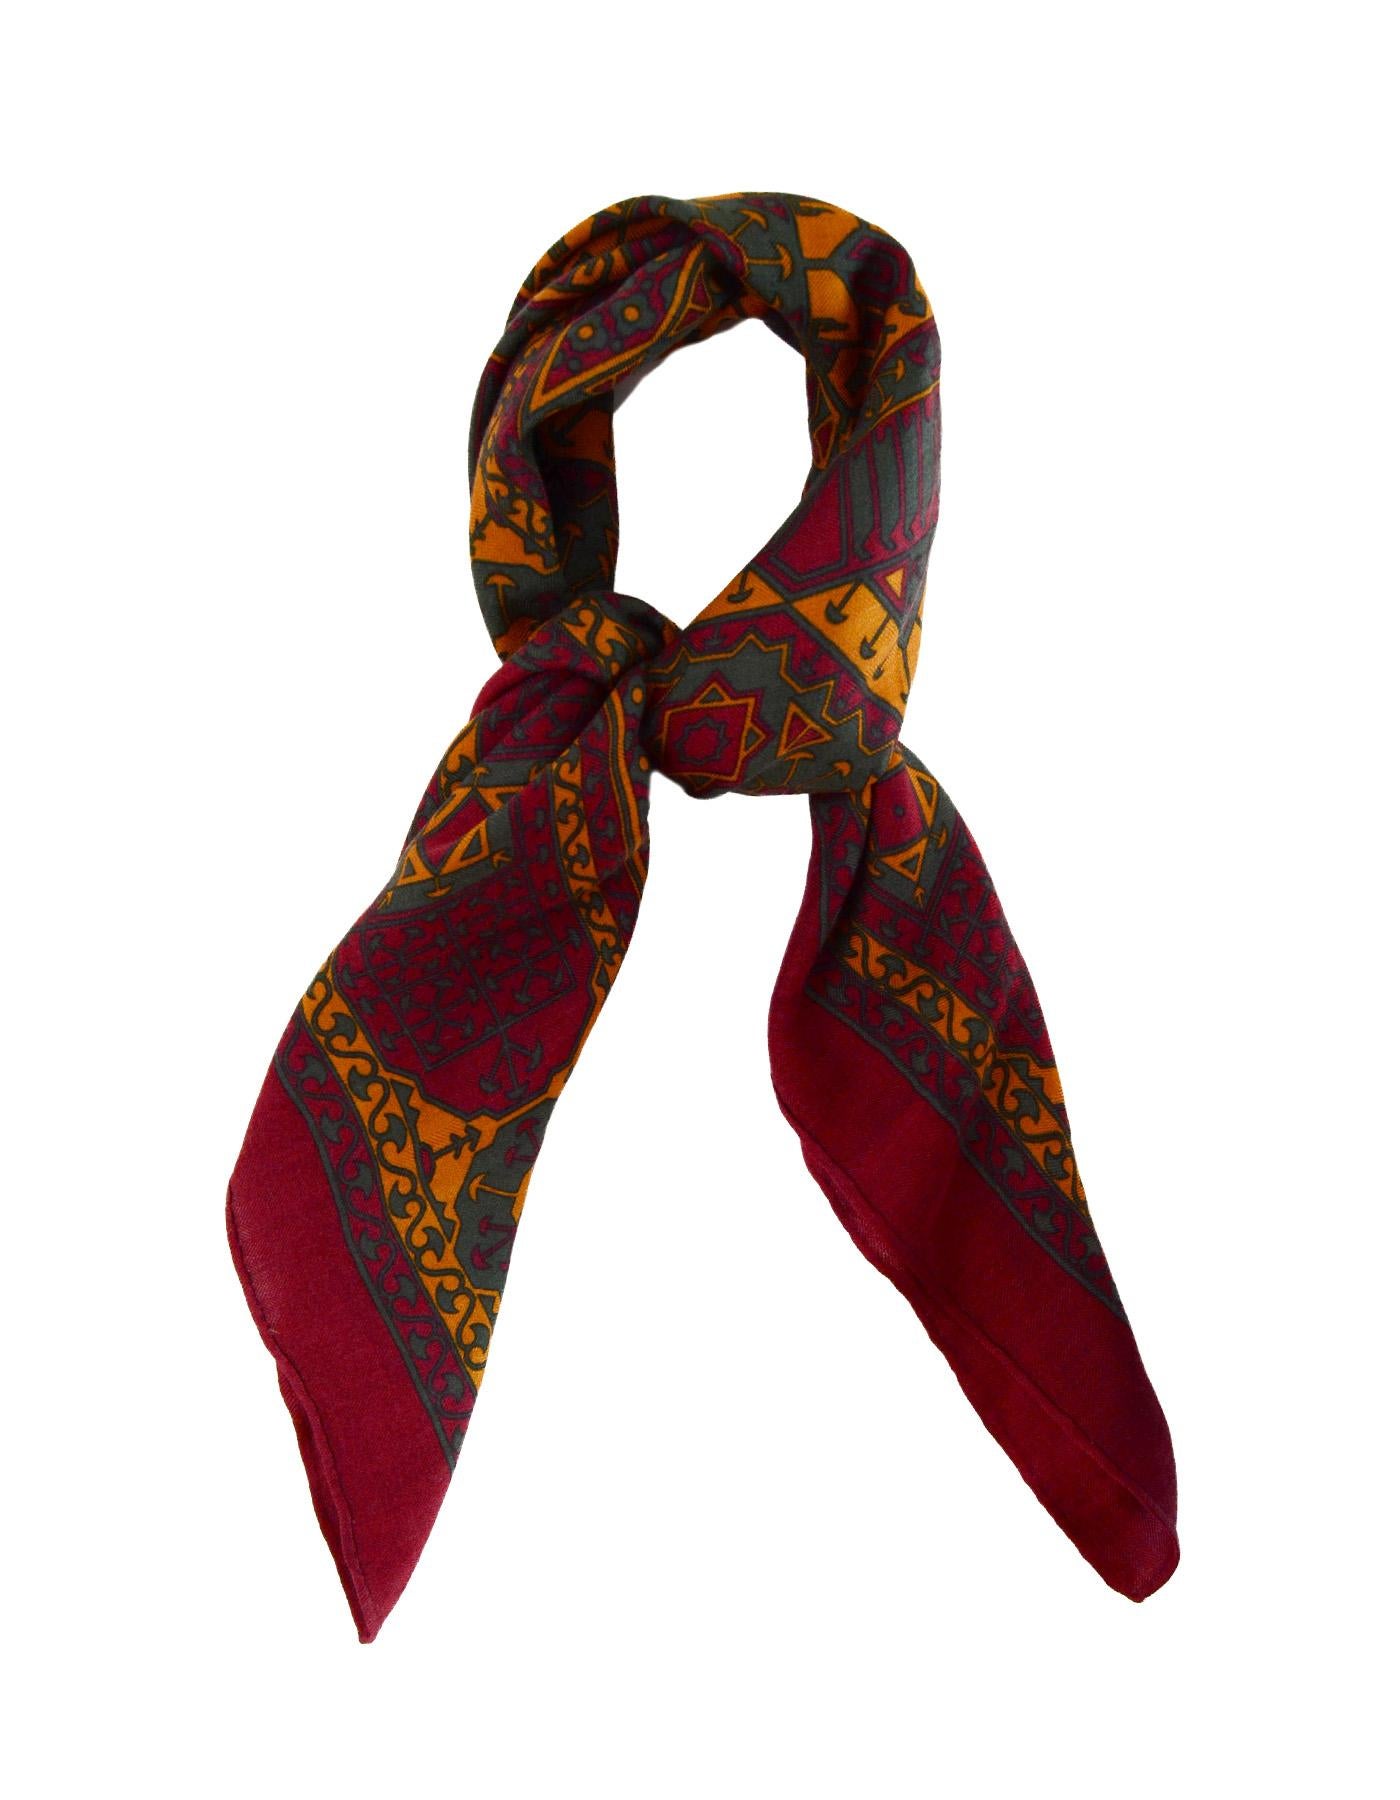 Hermes Maroon/Green/Mustard Silk/Cashmere Scarf 90cm

Made In: France
Color: Maroon, green, mustard
Materials:  65% cashmere, 35% silk
Overall Condition: Very good pre-owned condition with exception of some loose stitches at seam

Measurements: 
33